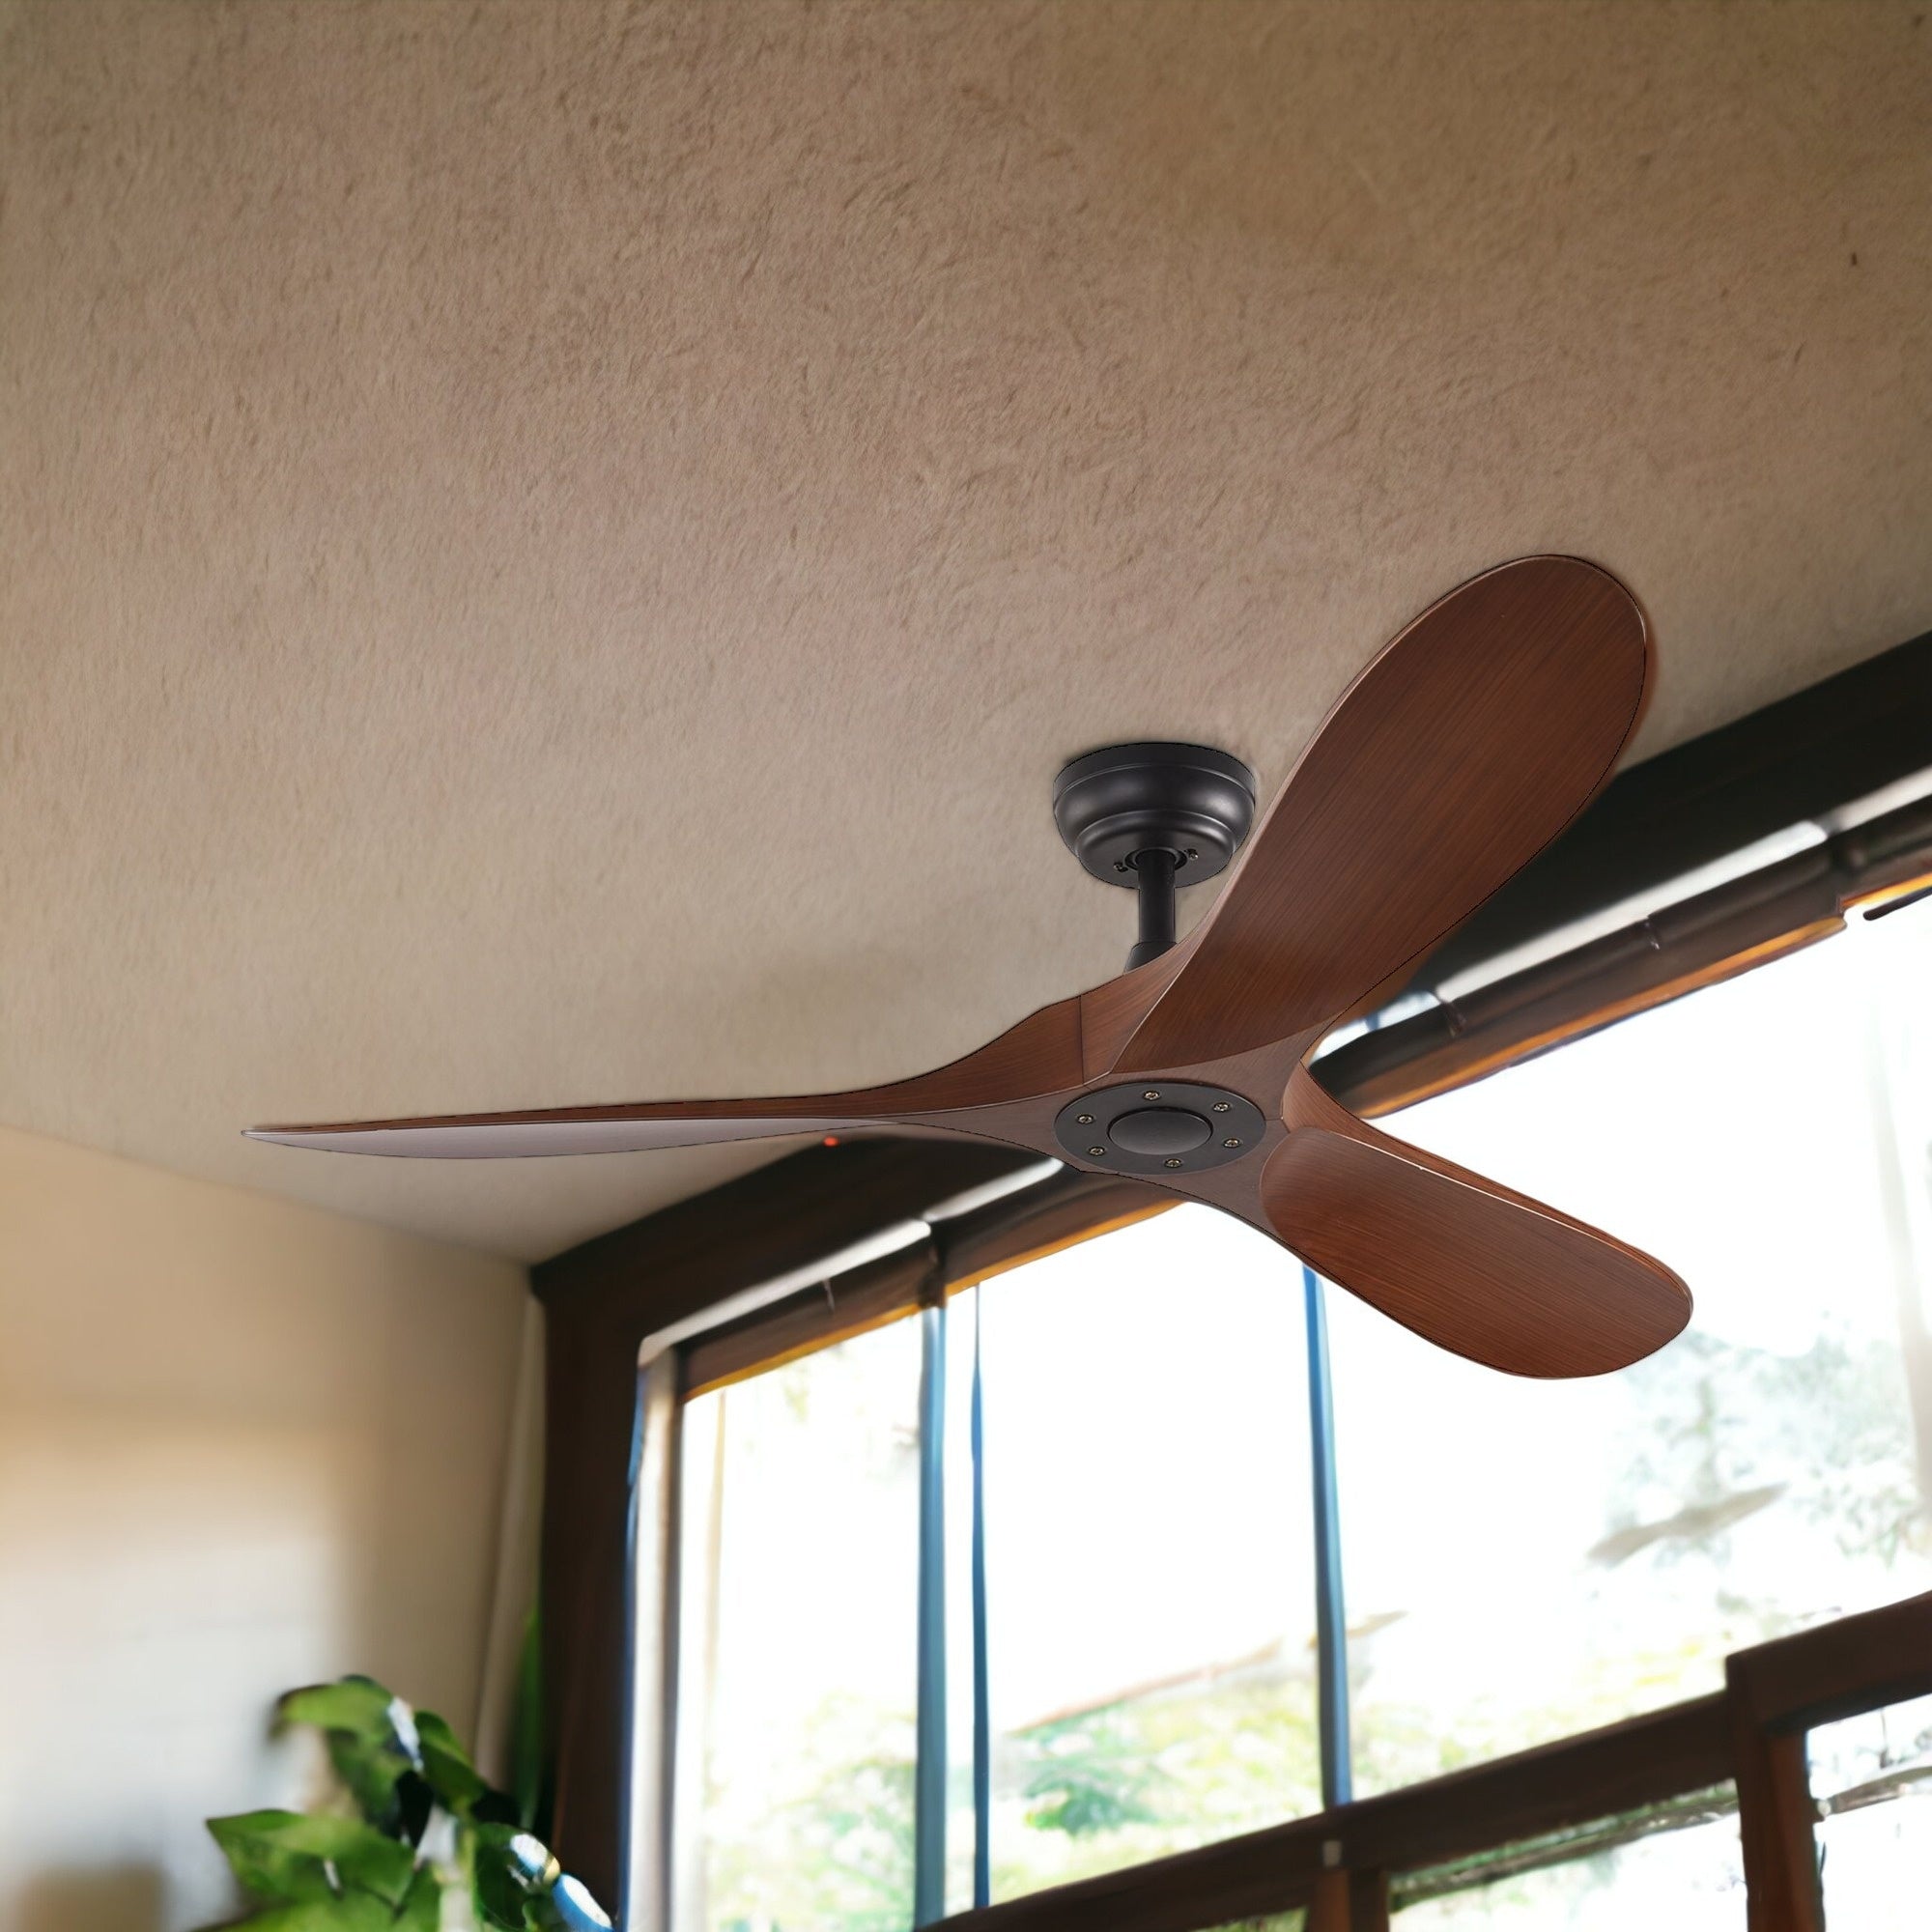 52" Black And Brown Propeller Three Blade Remote Control Integrated Light Ceiling Fan